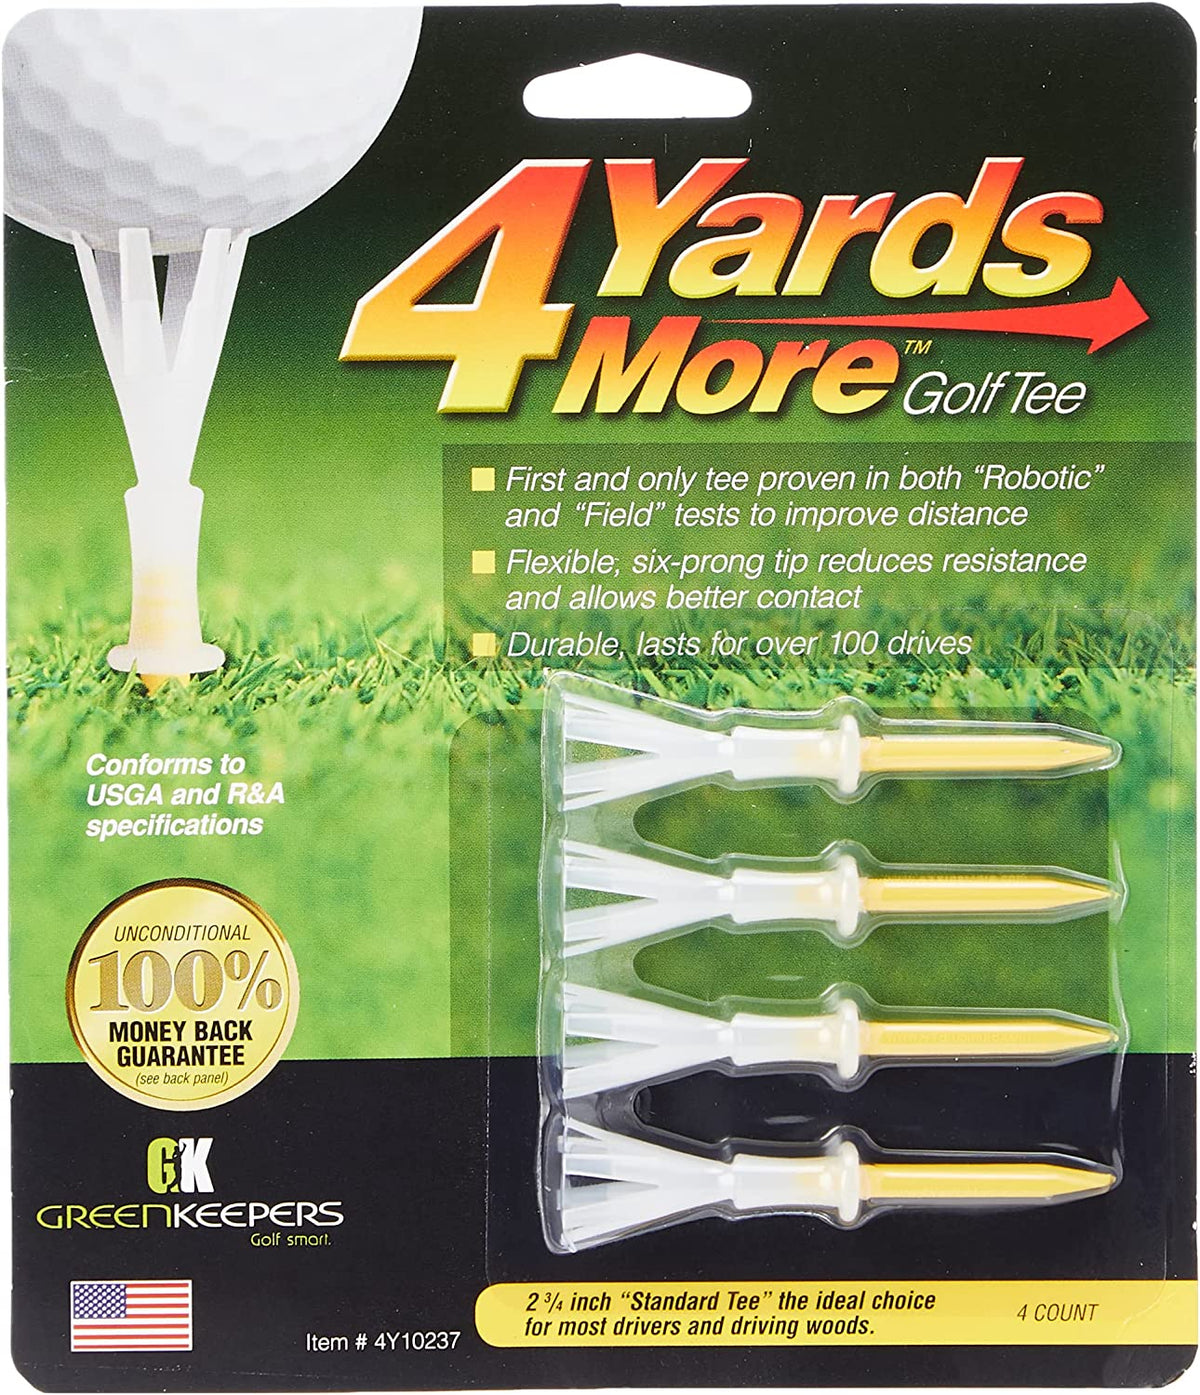 GREEN KEEPERS 4 YARDS MORE GOLF TEES 2 3/4" BLISTER PACK